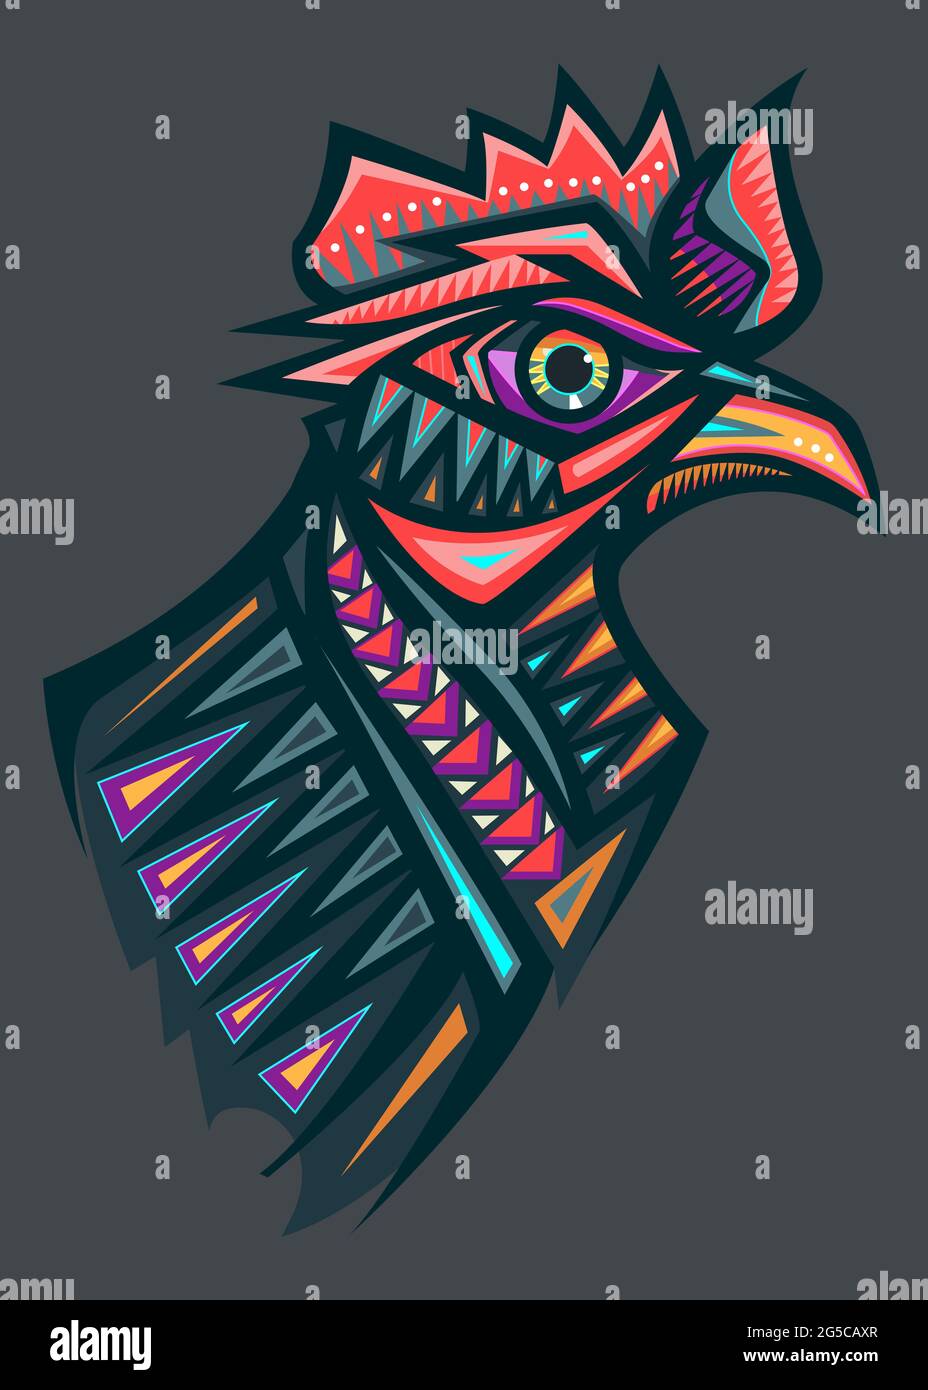 Hand drawn vector illustration or drawing of a colorful mexican rooster Stock Photo